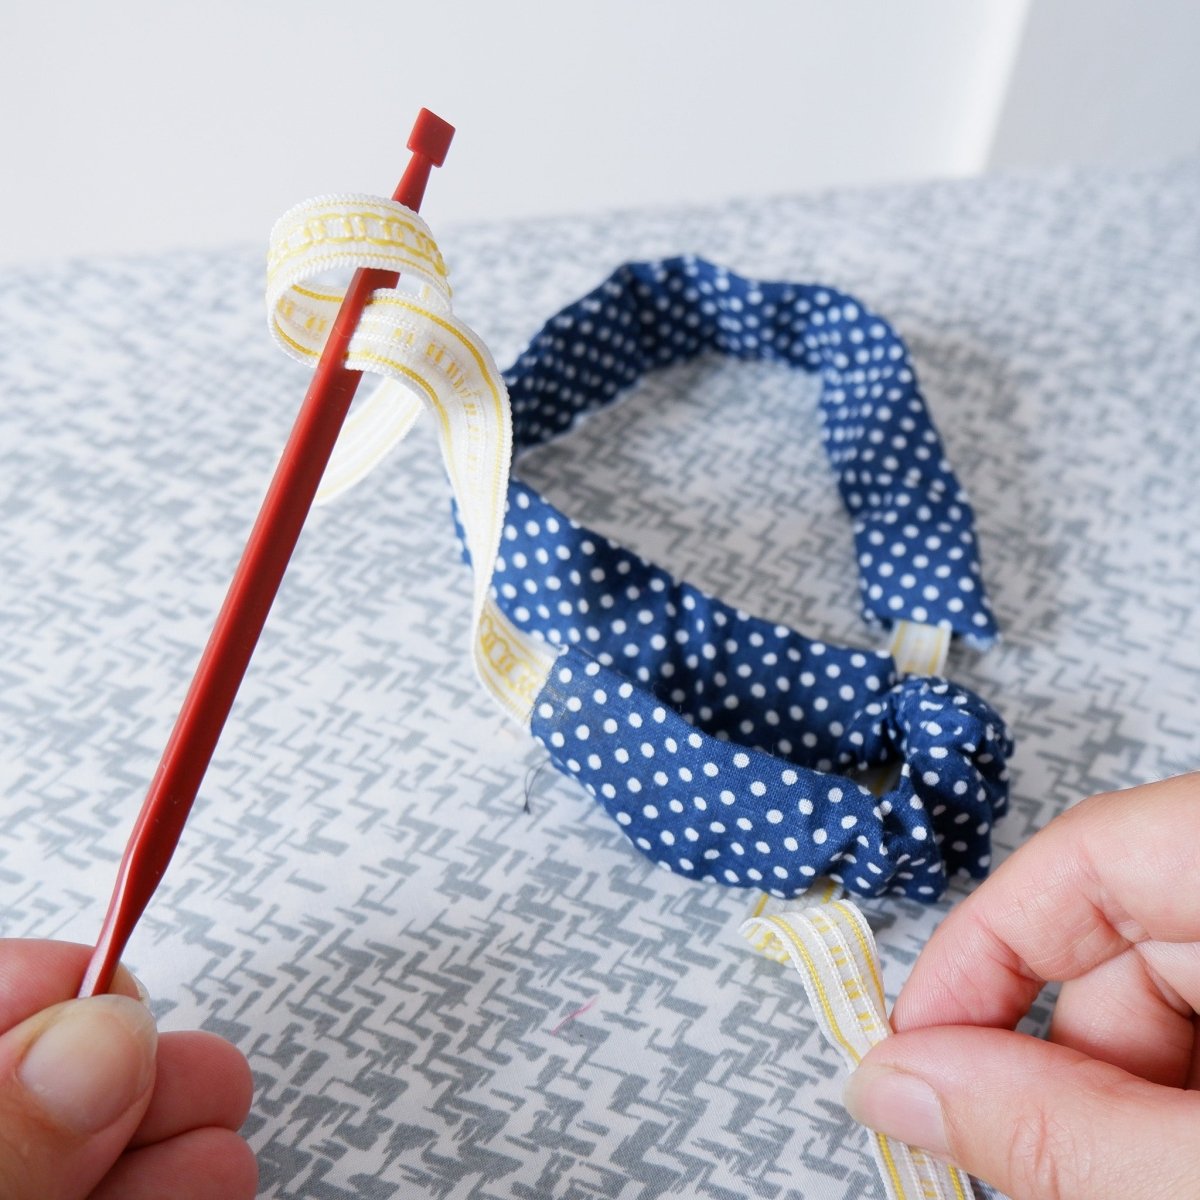 Using Sewist's Magic Wand as a bodkin to feed elastic through a sewing project